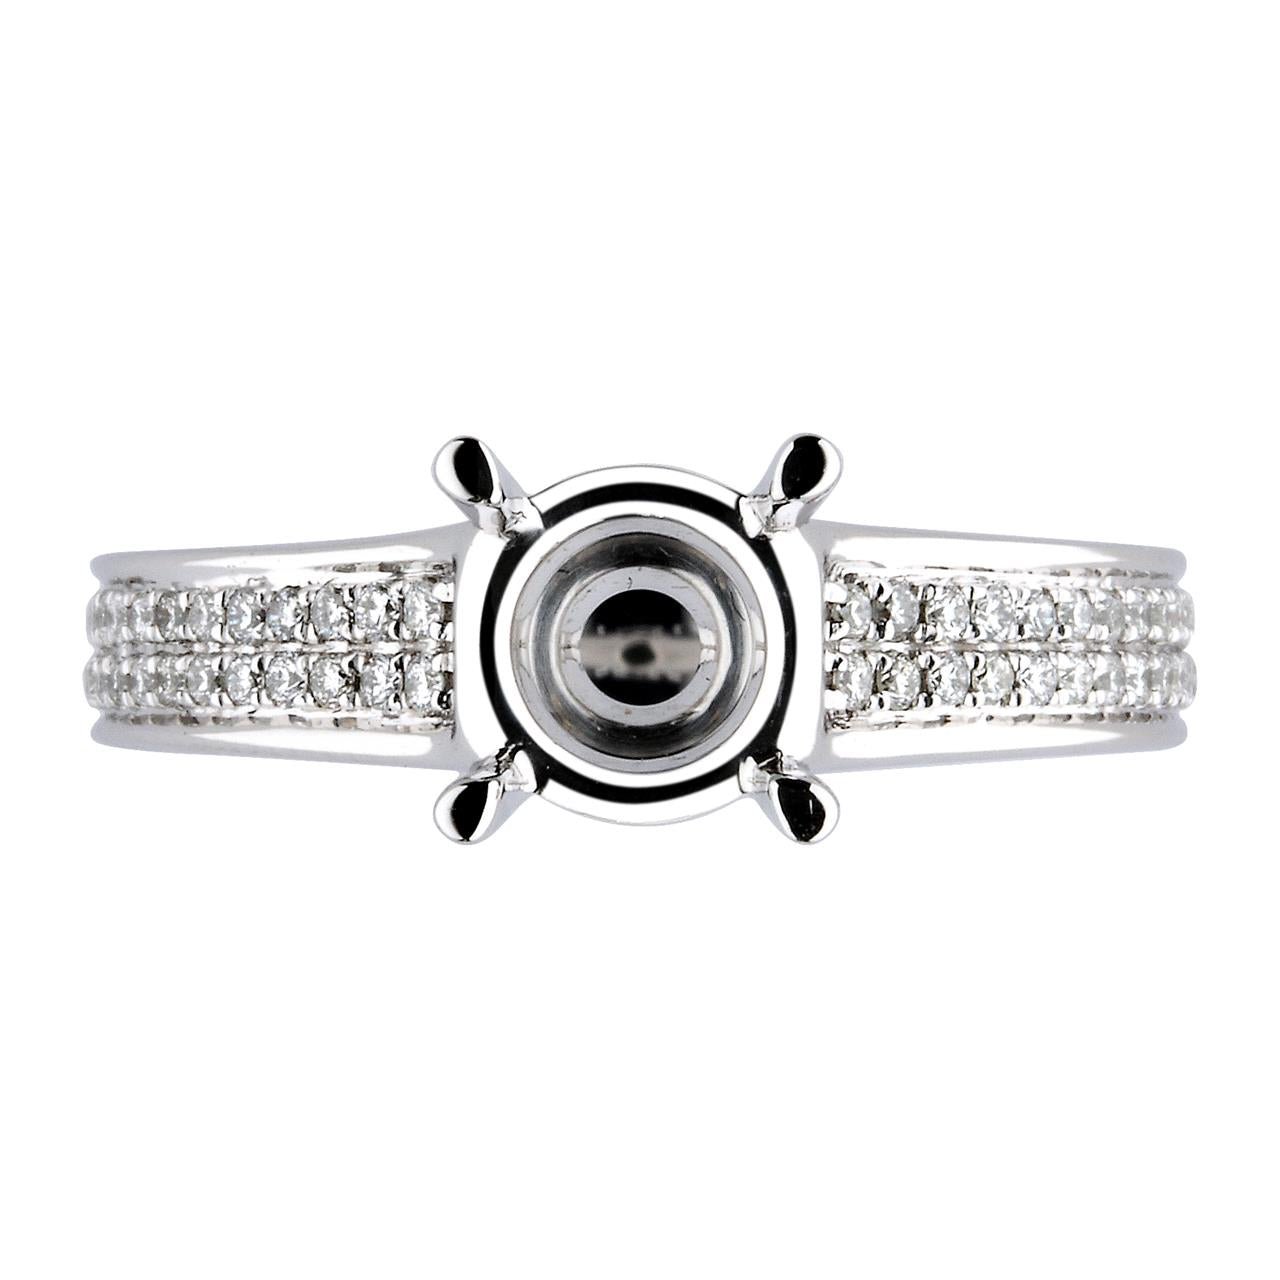 18K White Gold Two Row Engagement ring - Warwick Jewelers